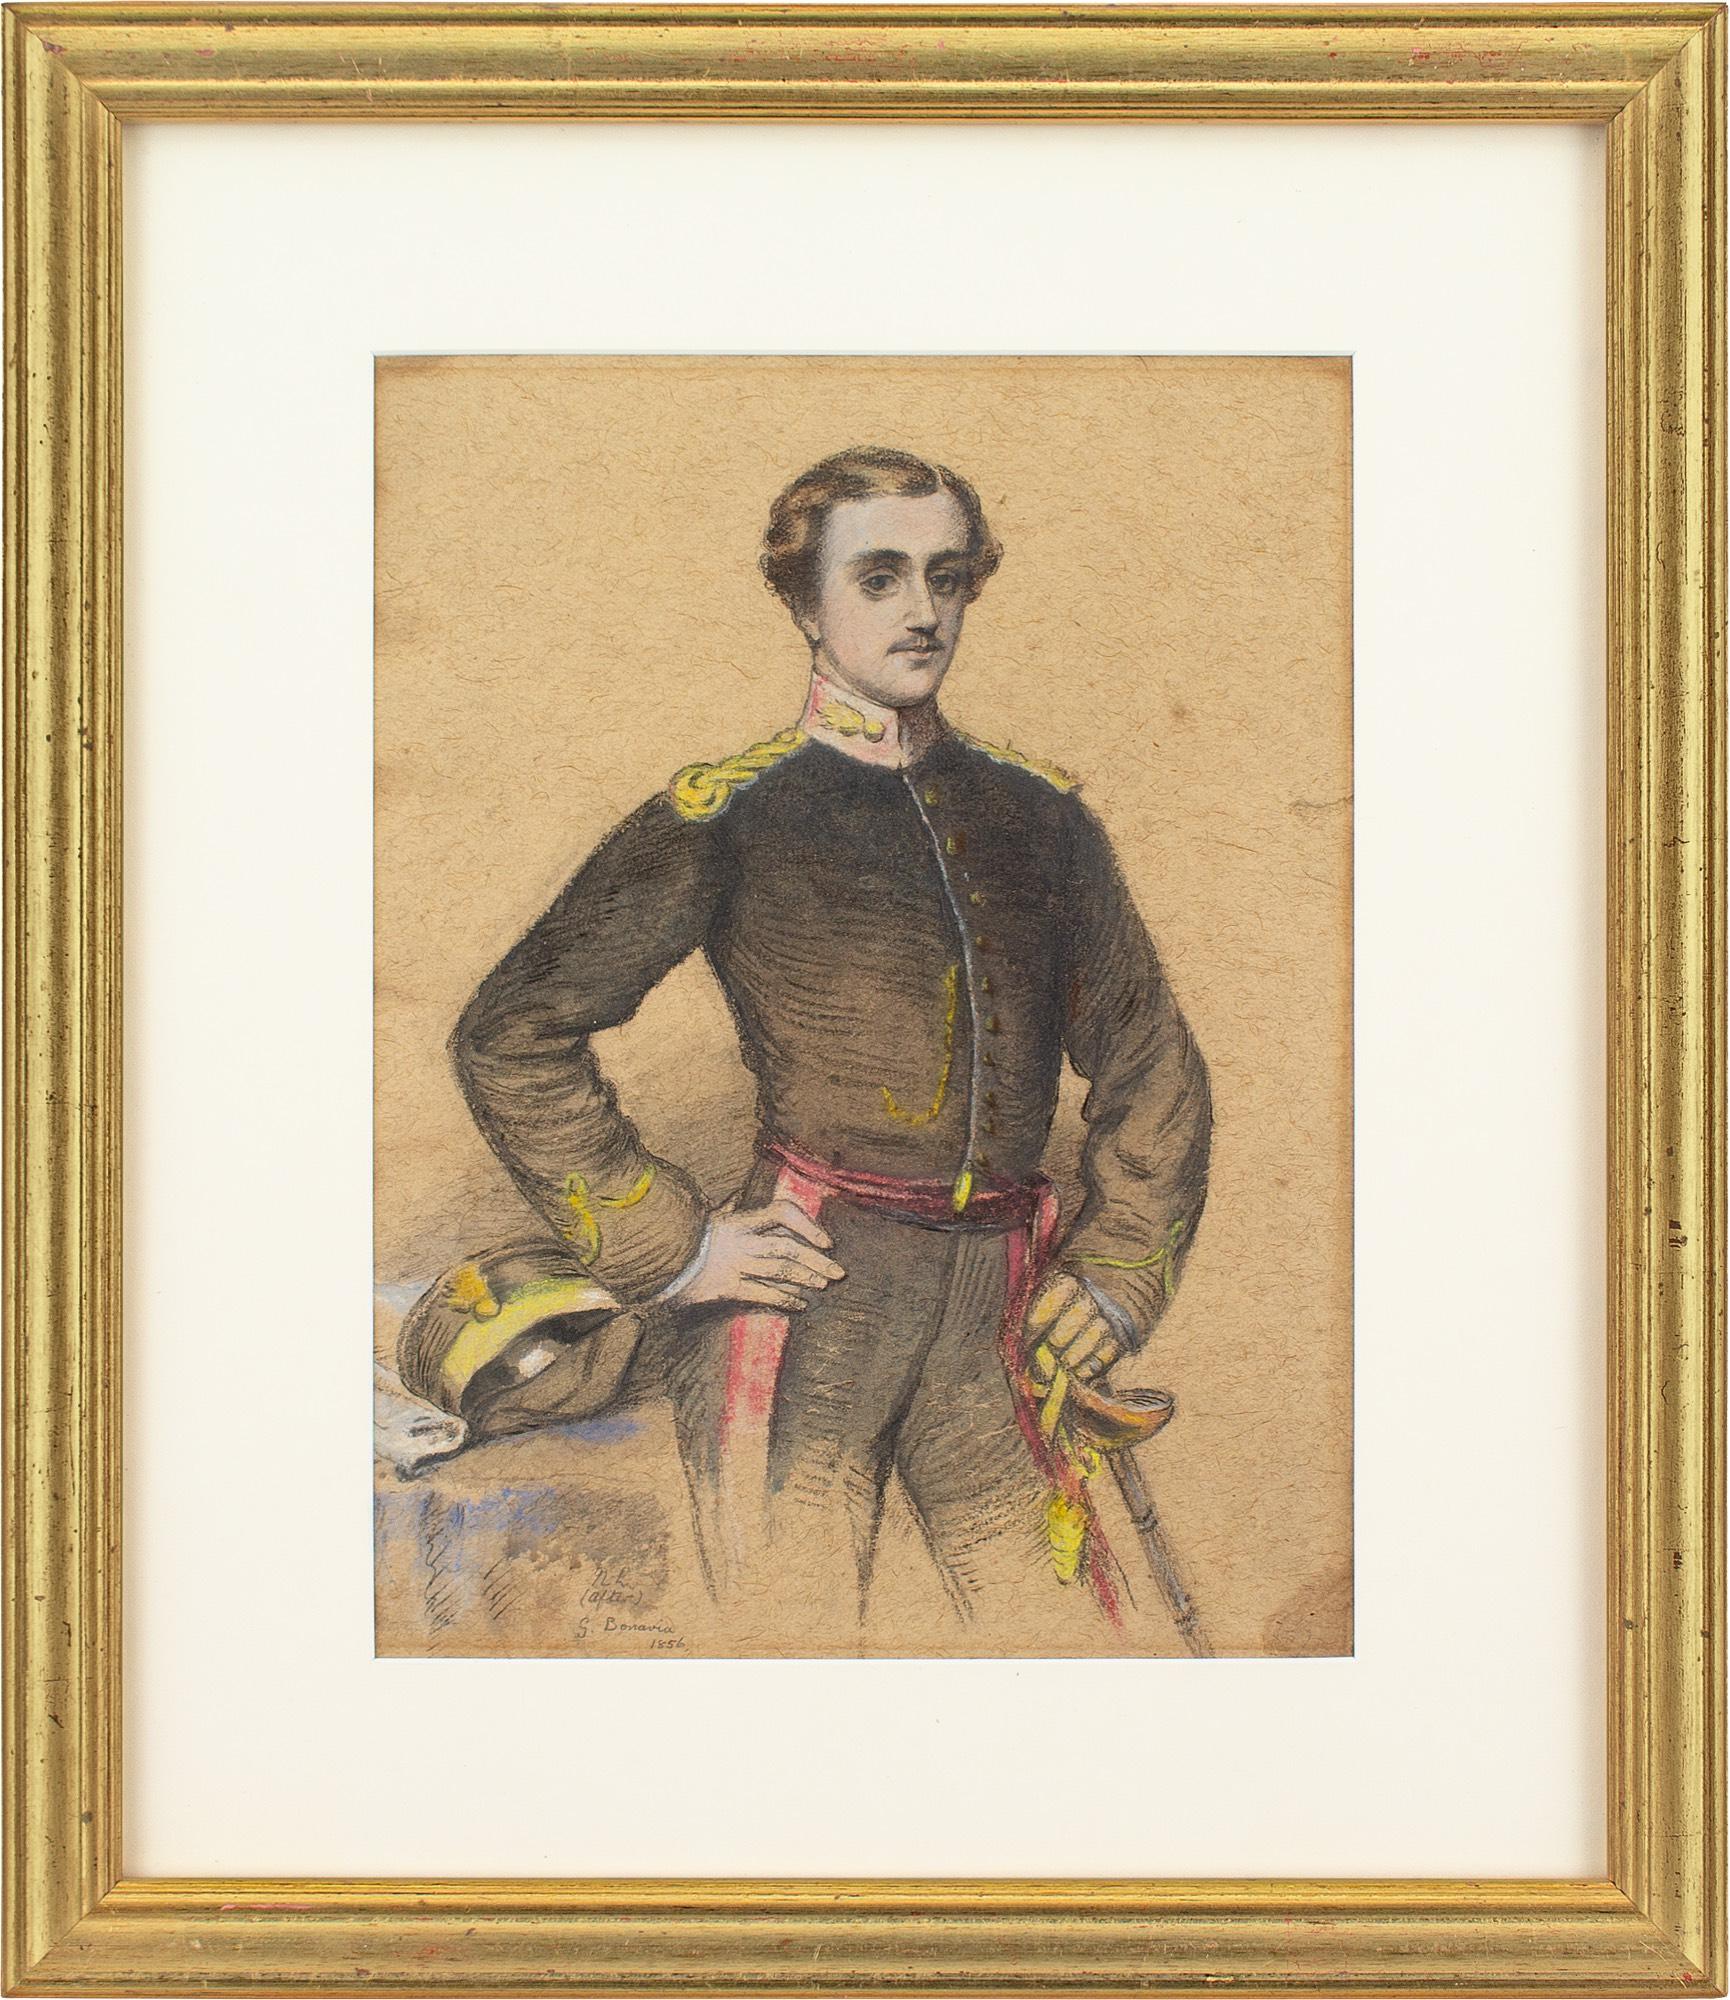 1850s Portrait Drawings and Watercolors